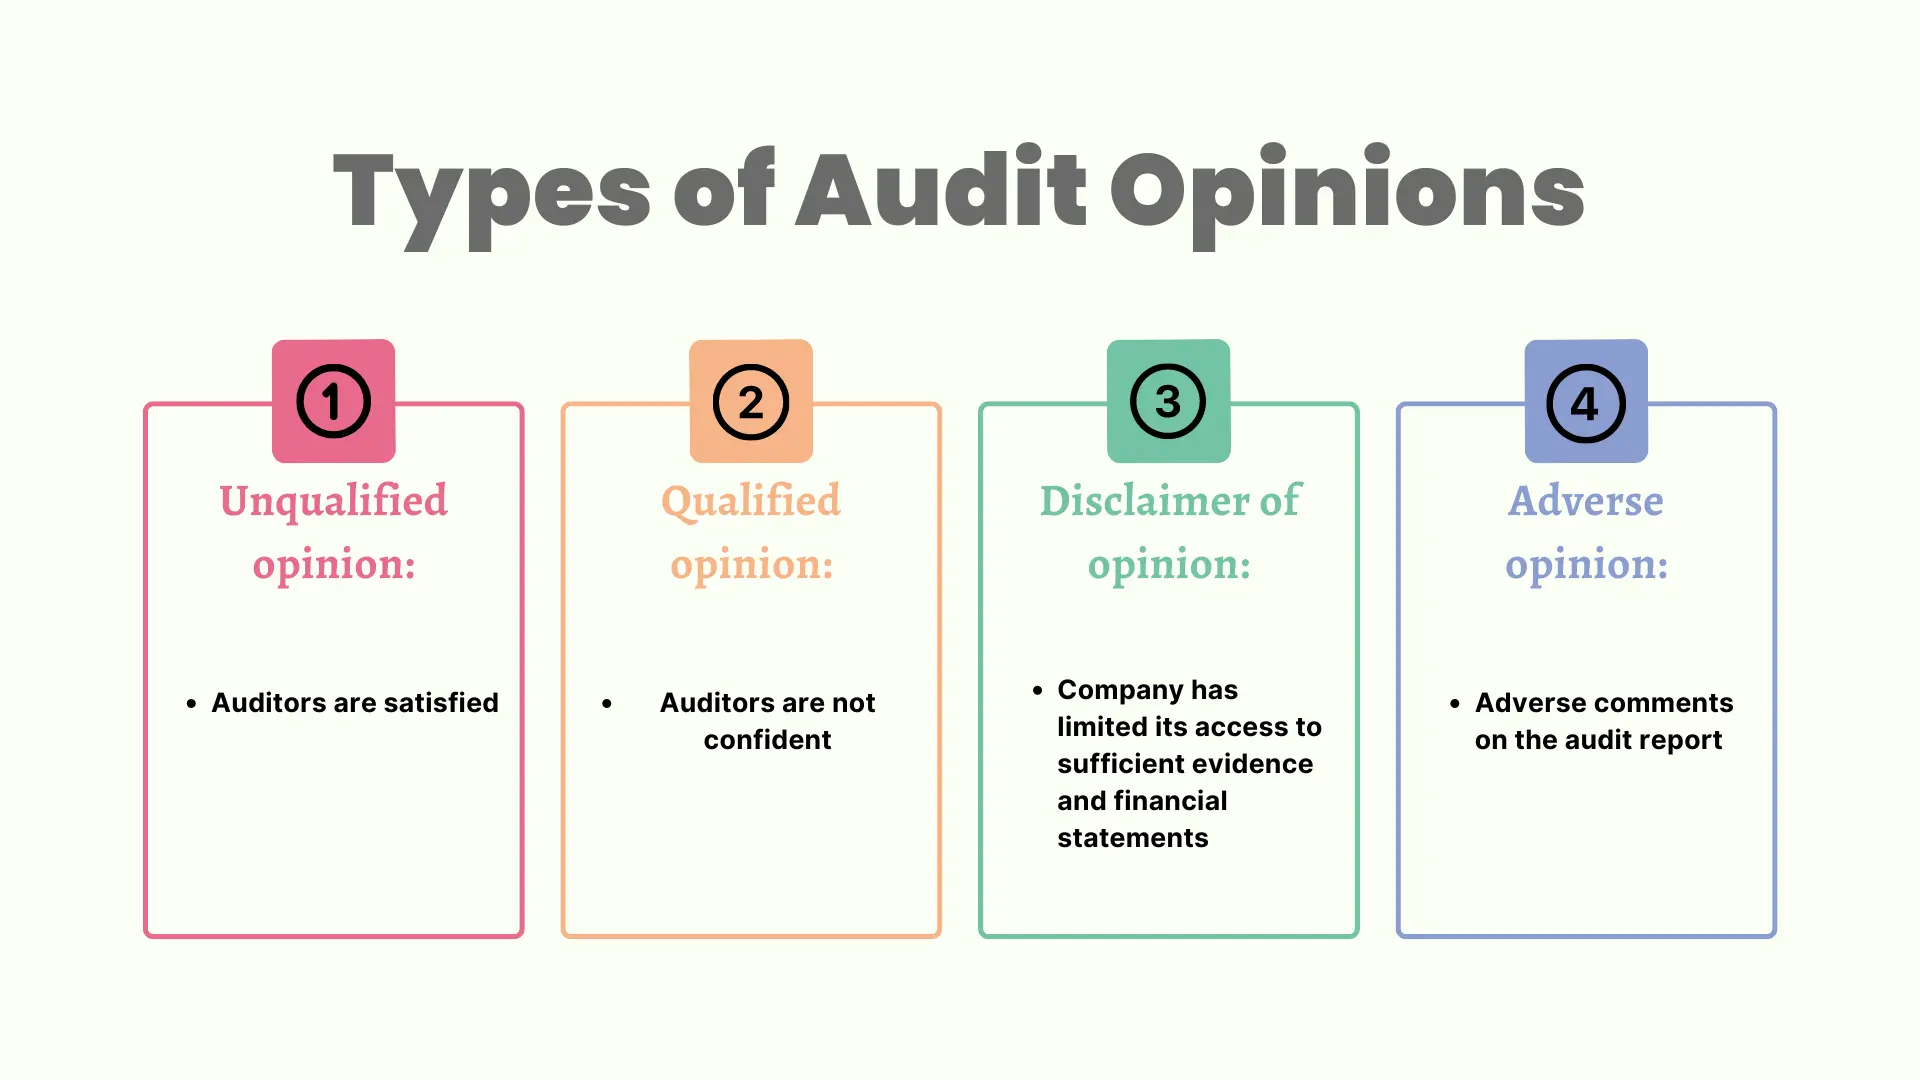 in a financial statement audit the auditor - Why do auditors audit financial statements